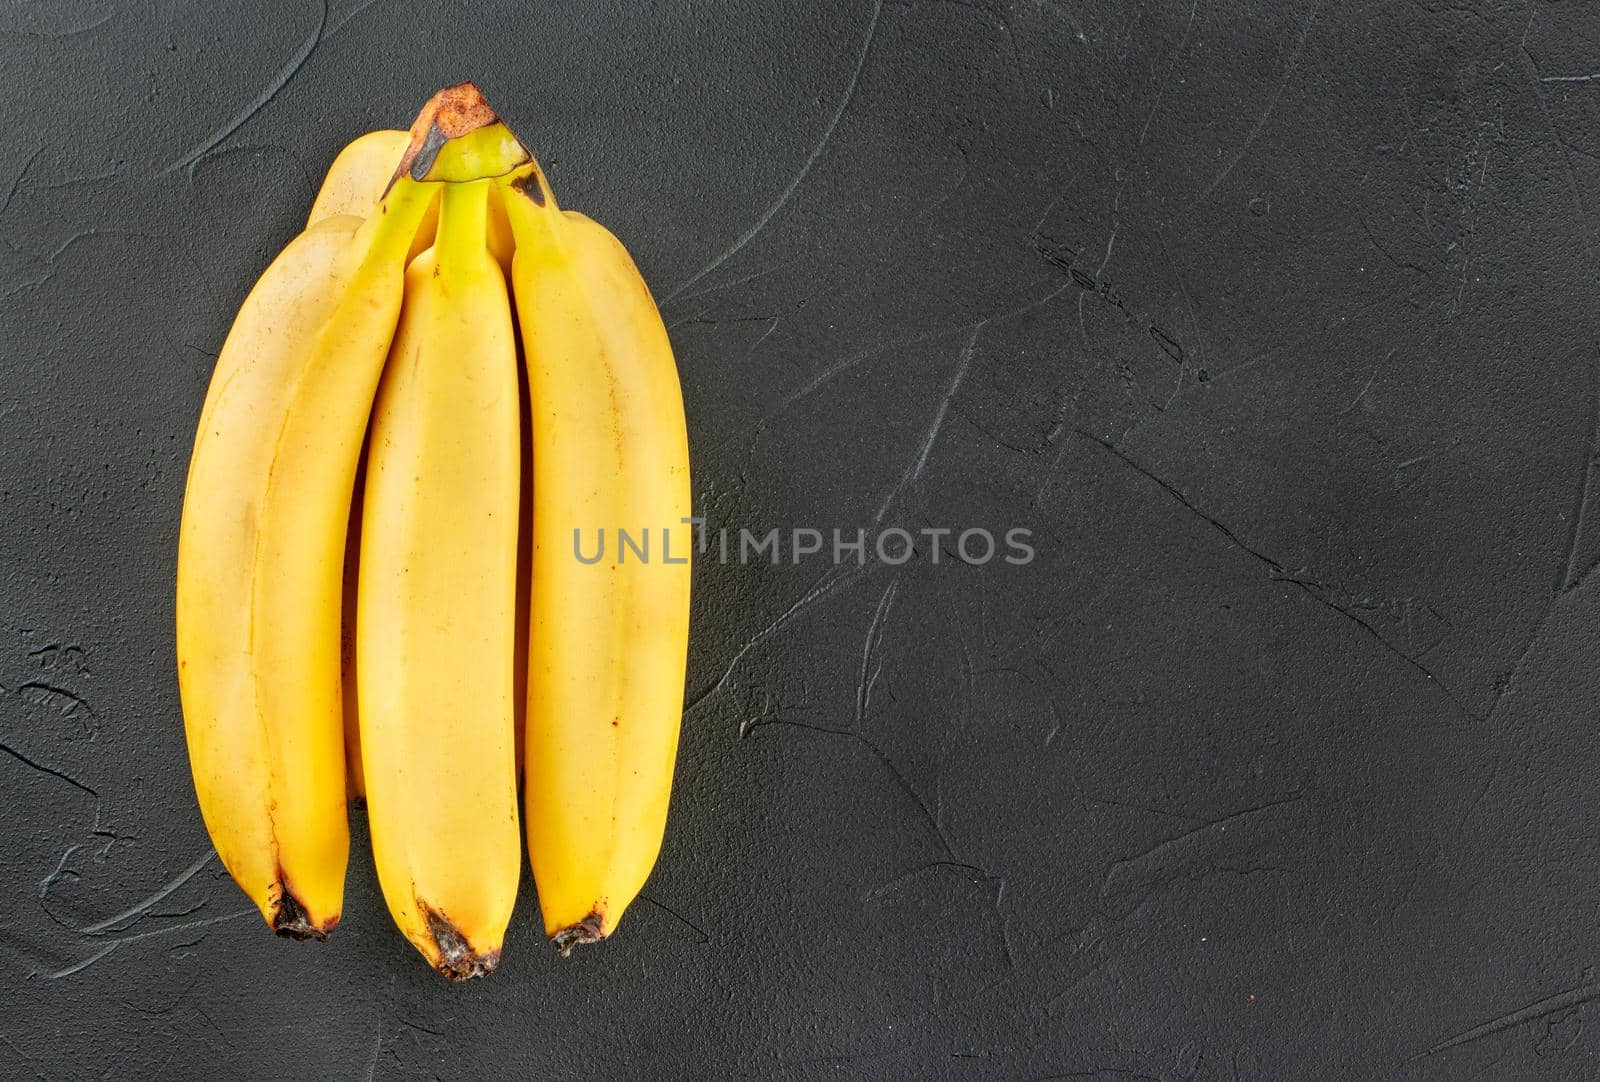 Bunch of bananas by andregric